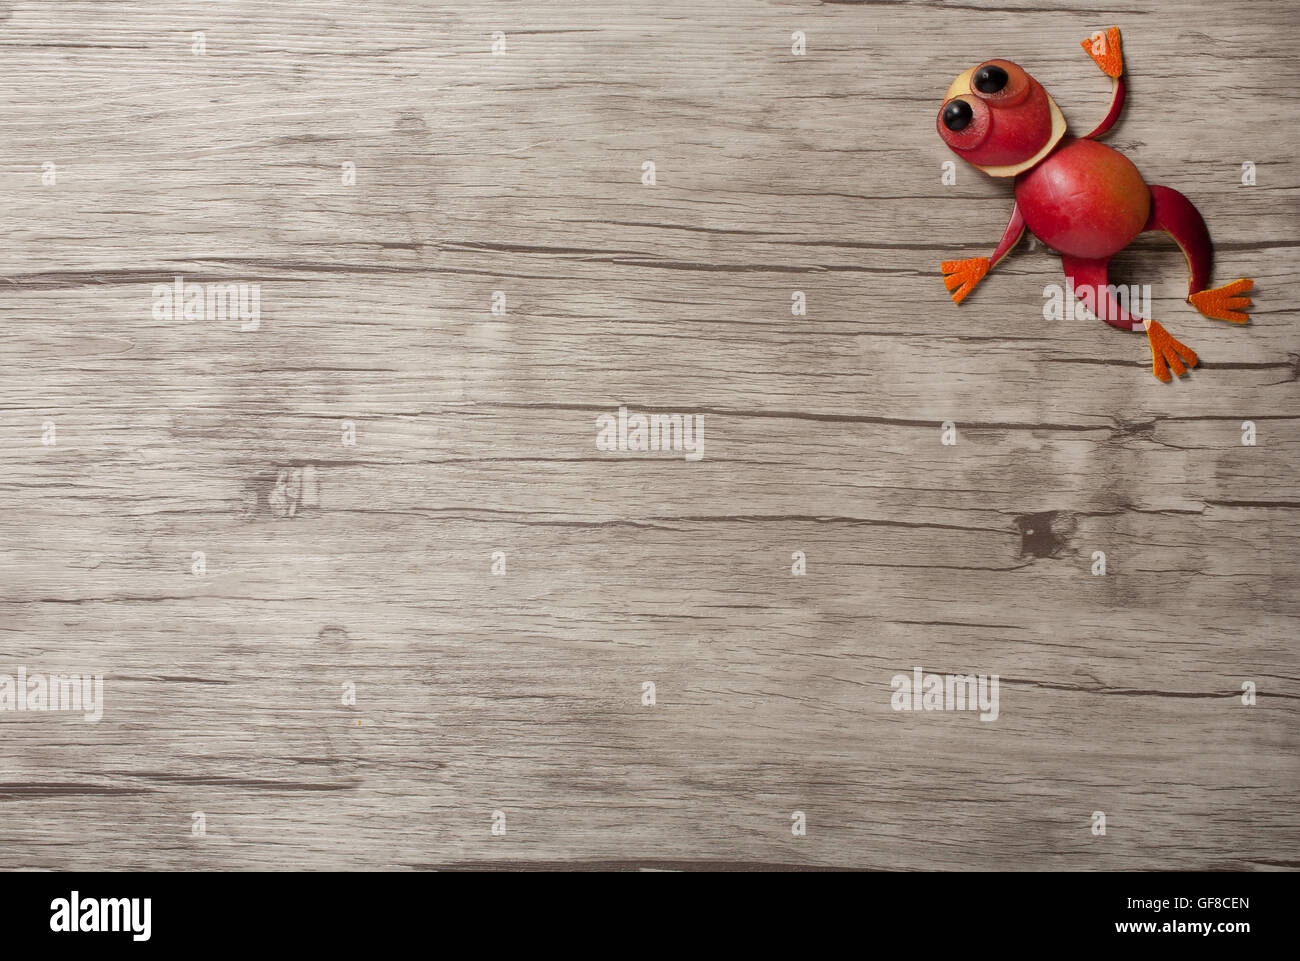 Jumping frog made of apple on wooden background Stock Photo